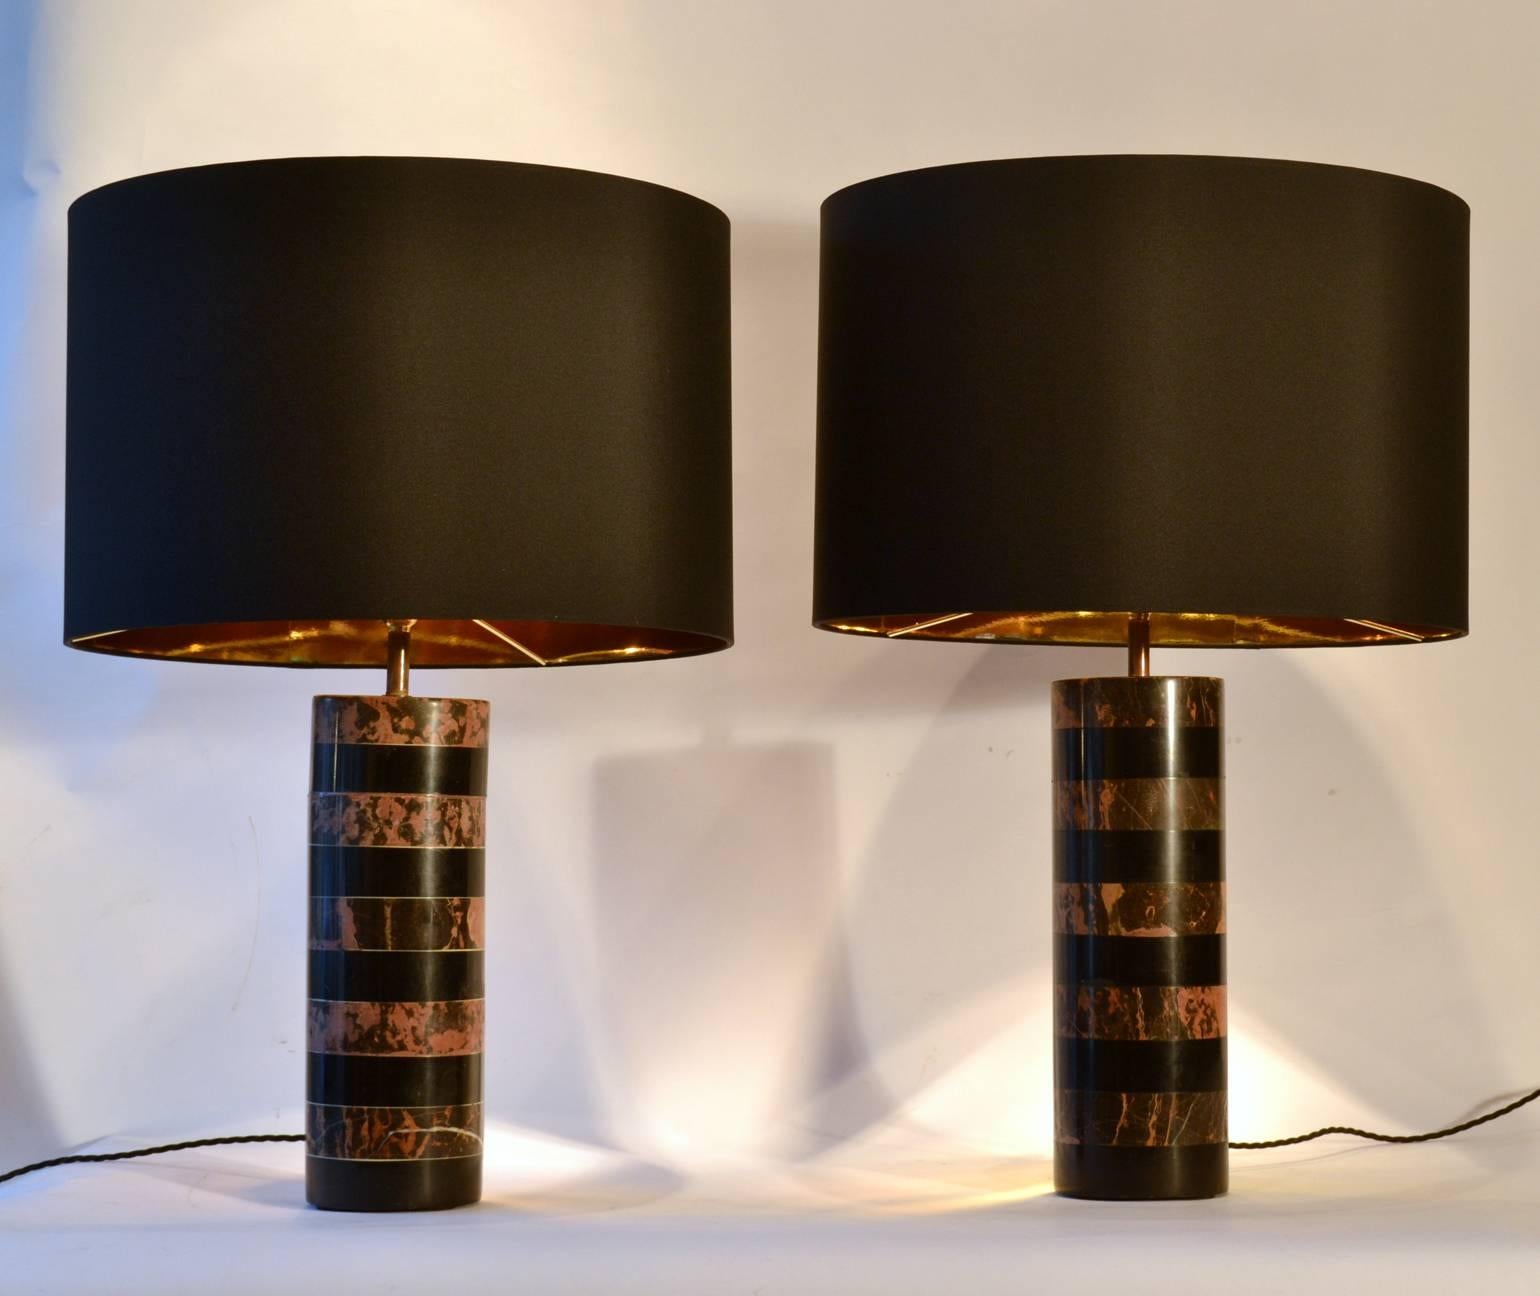 Layers of black marble with alternating black & pink layers of solid marble make this pair of 1970's cylinder table lamps elegant and classic.
The black & gold drum shape shades, D45cm. are new.